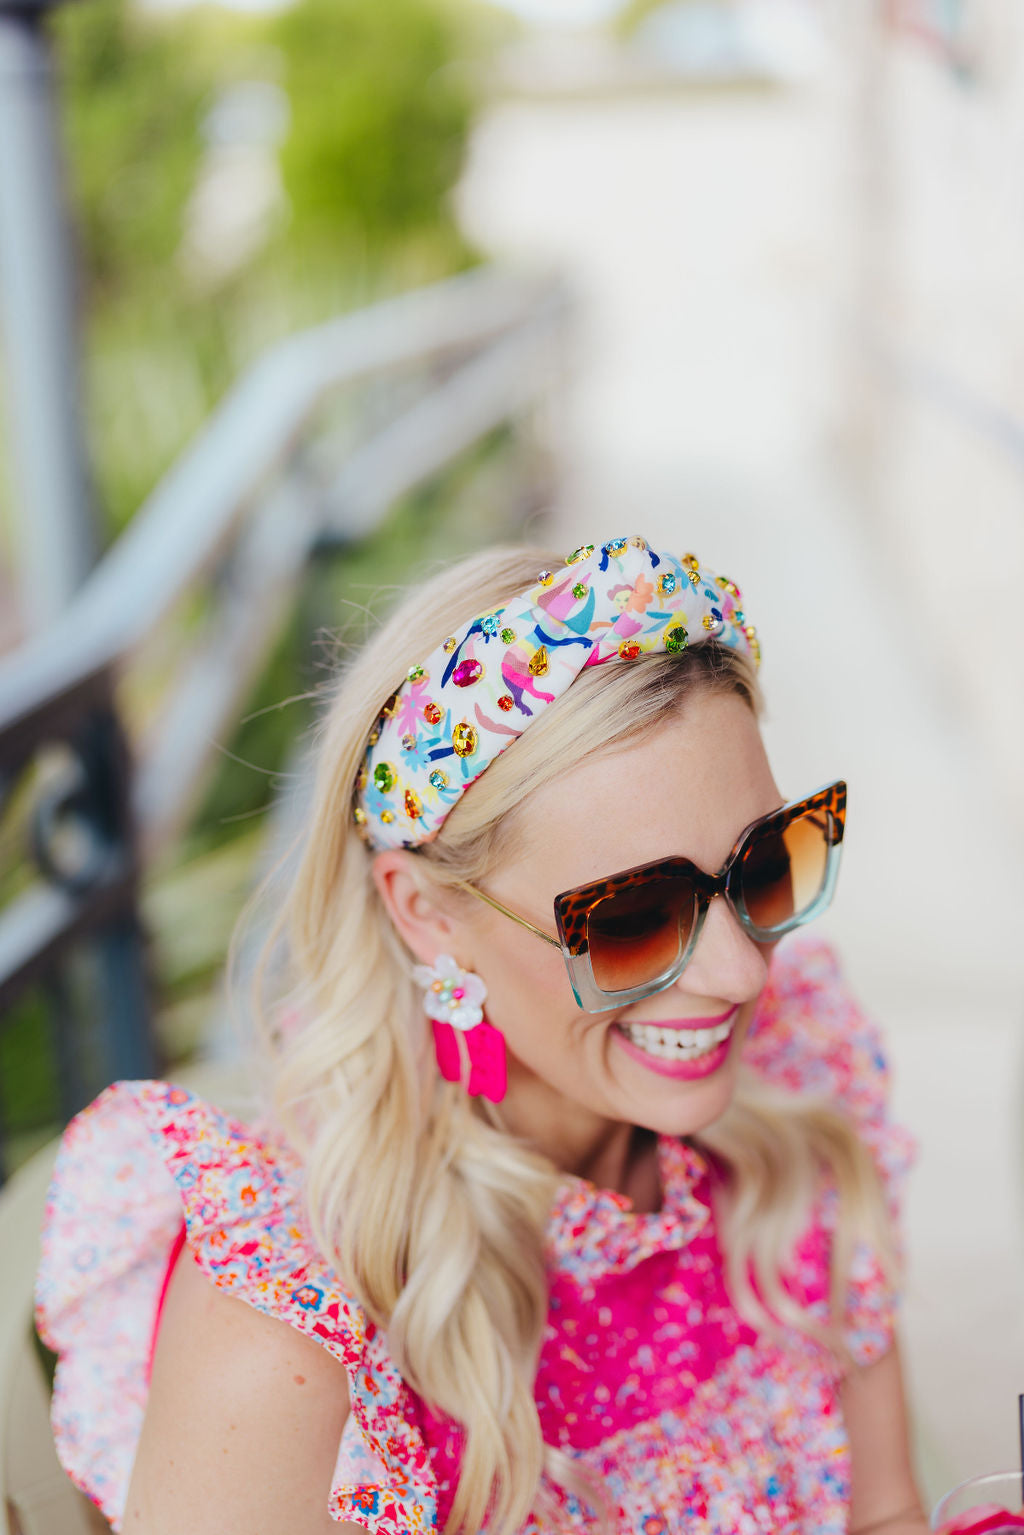 Adult Size Otomi Print Headband with Crystals